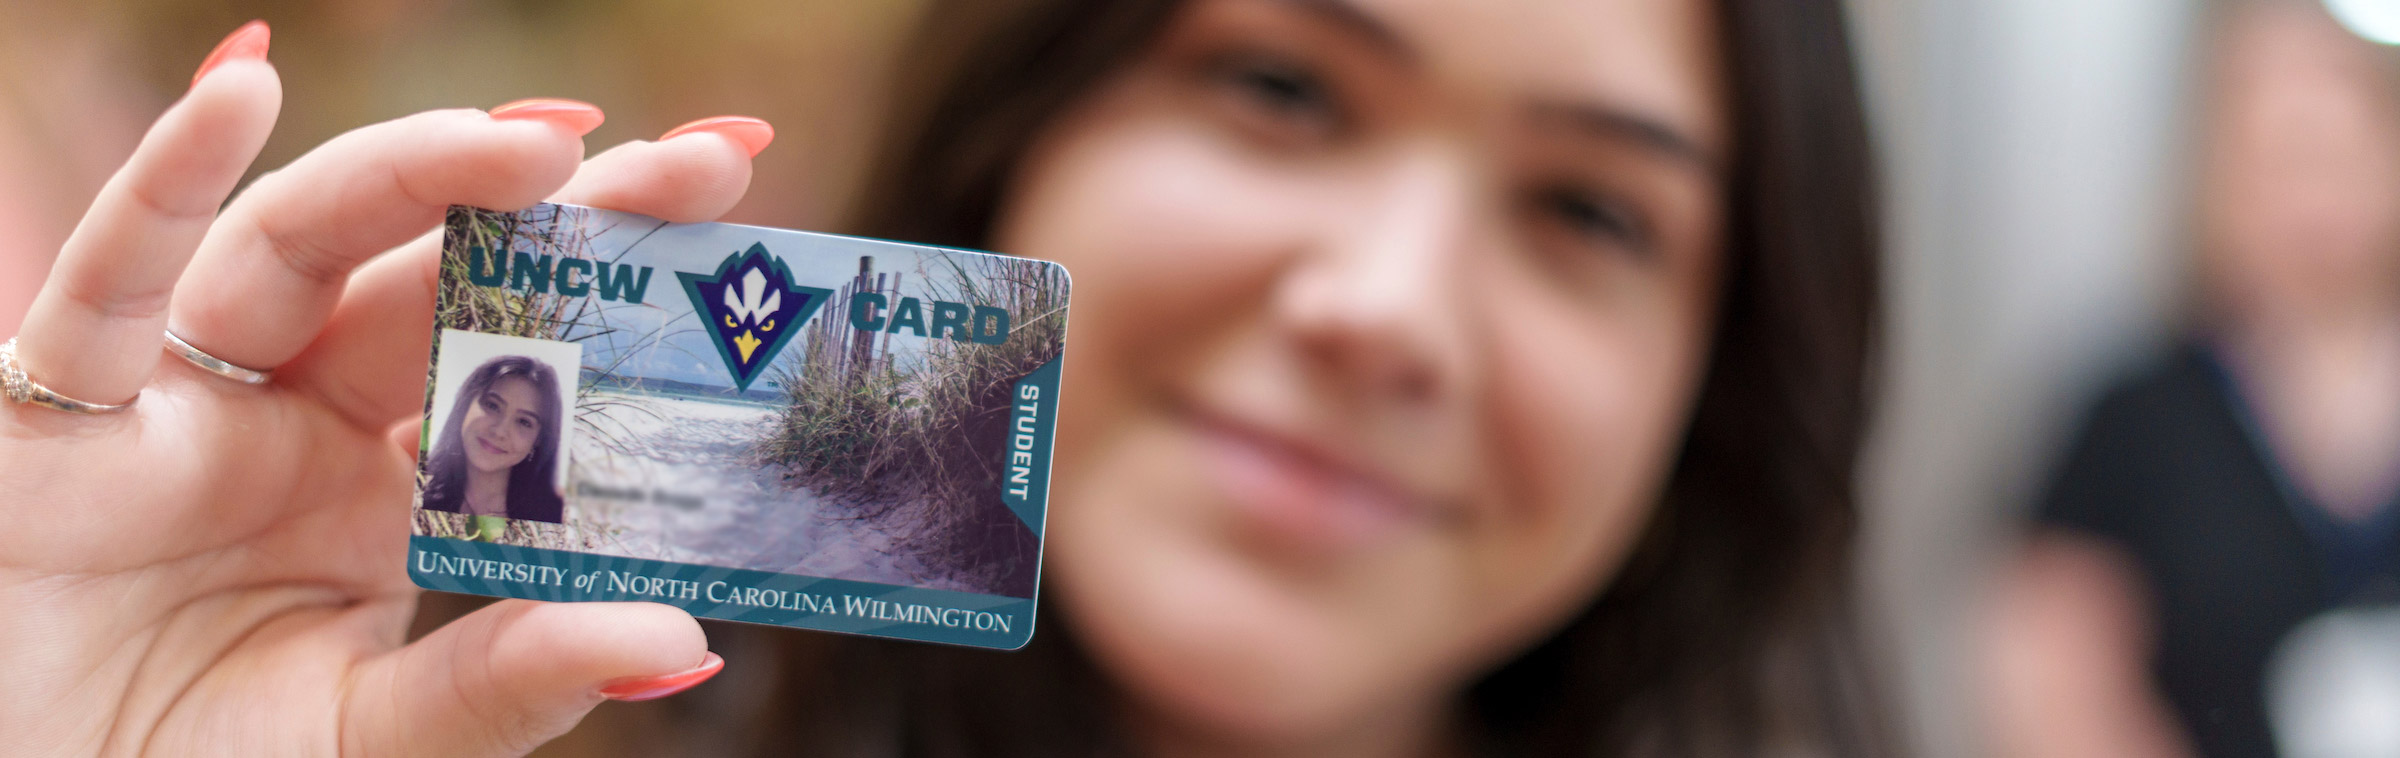 student in the background showing a UNCW one card